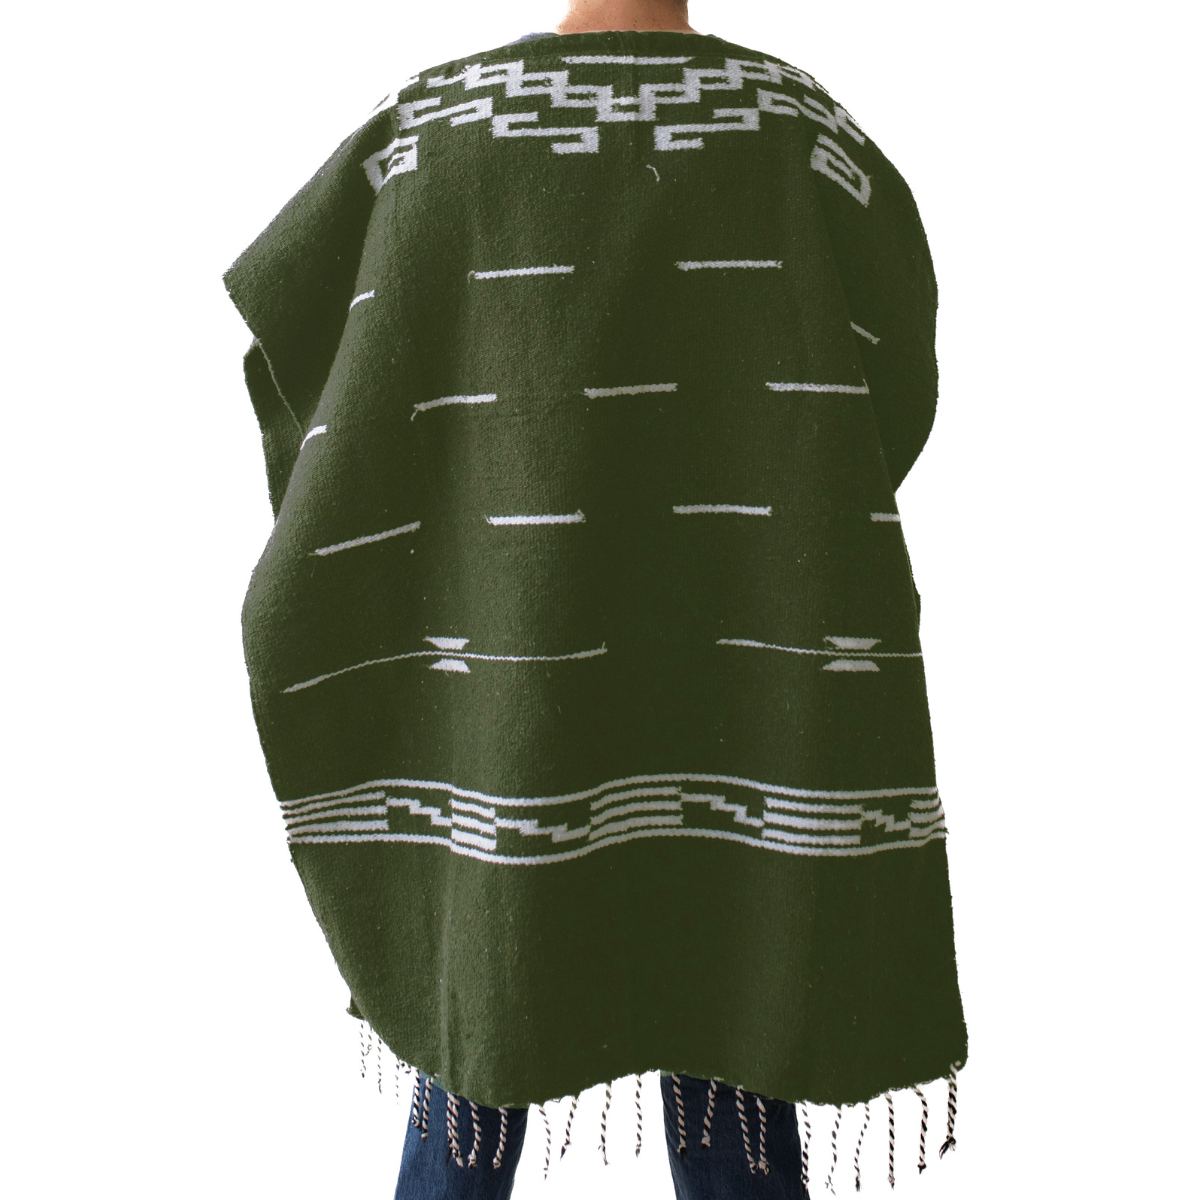 Mexican Poncho for Men - Clint Eastwood Poncho - GREEN